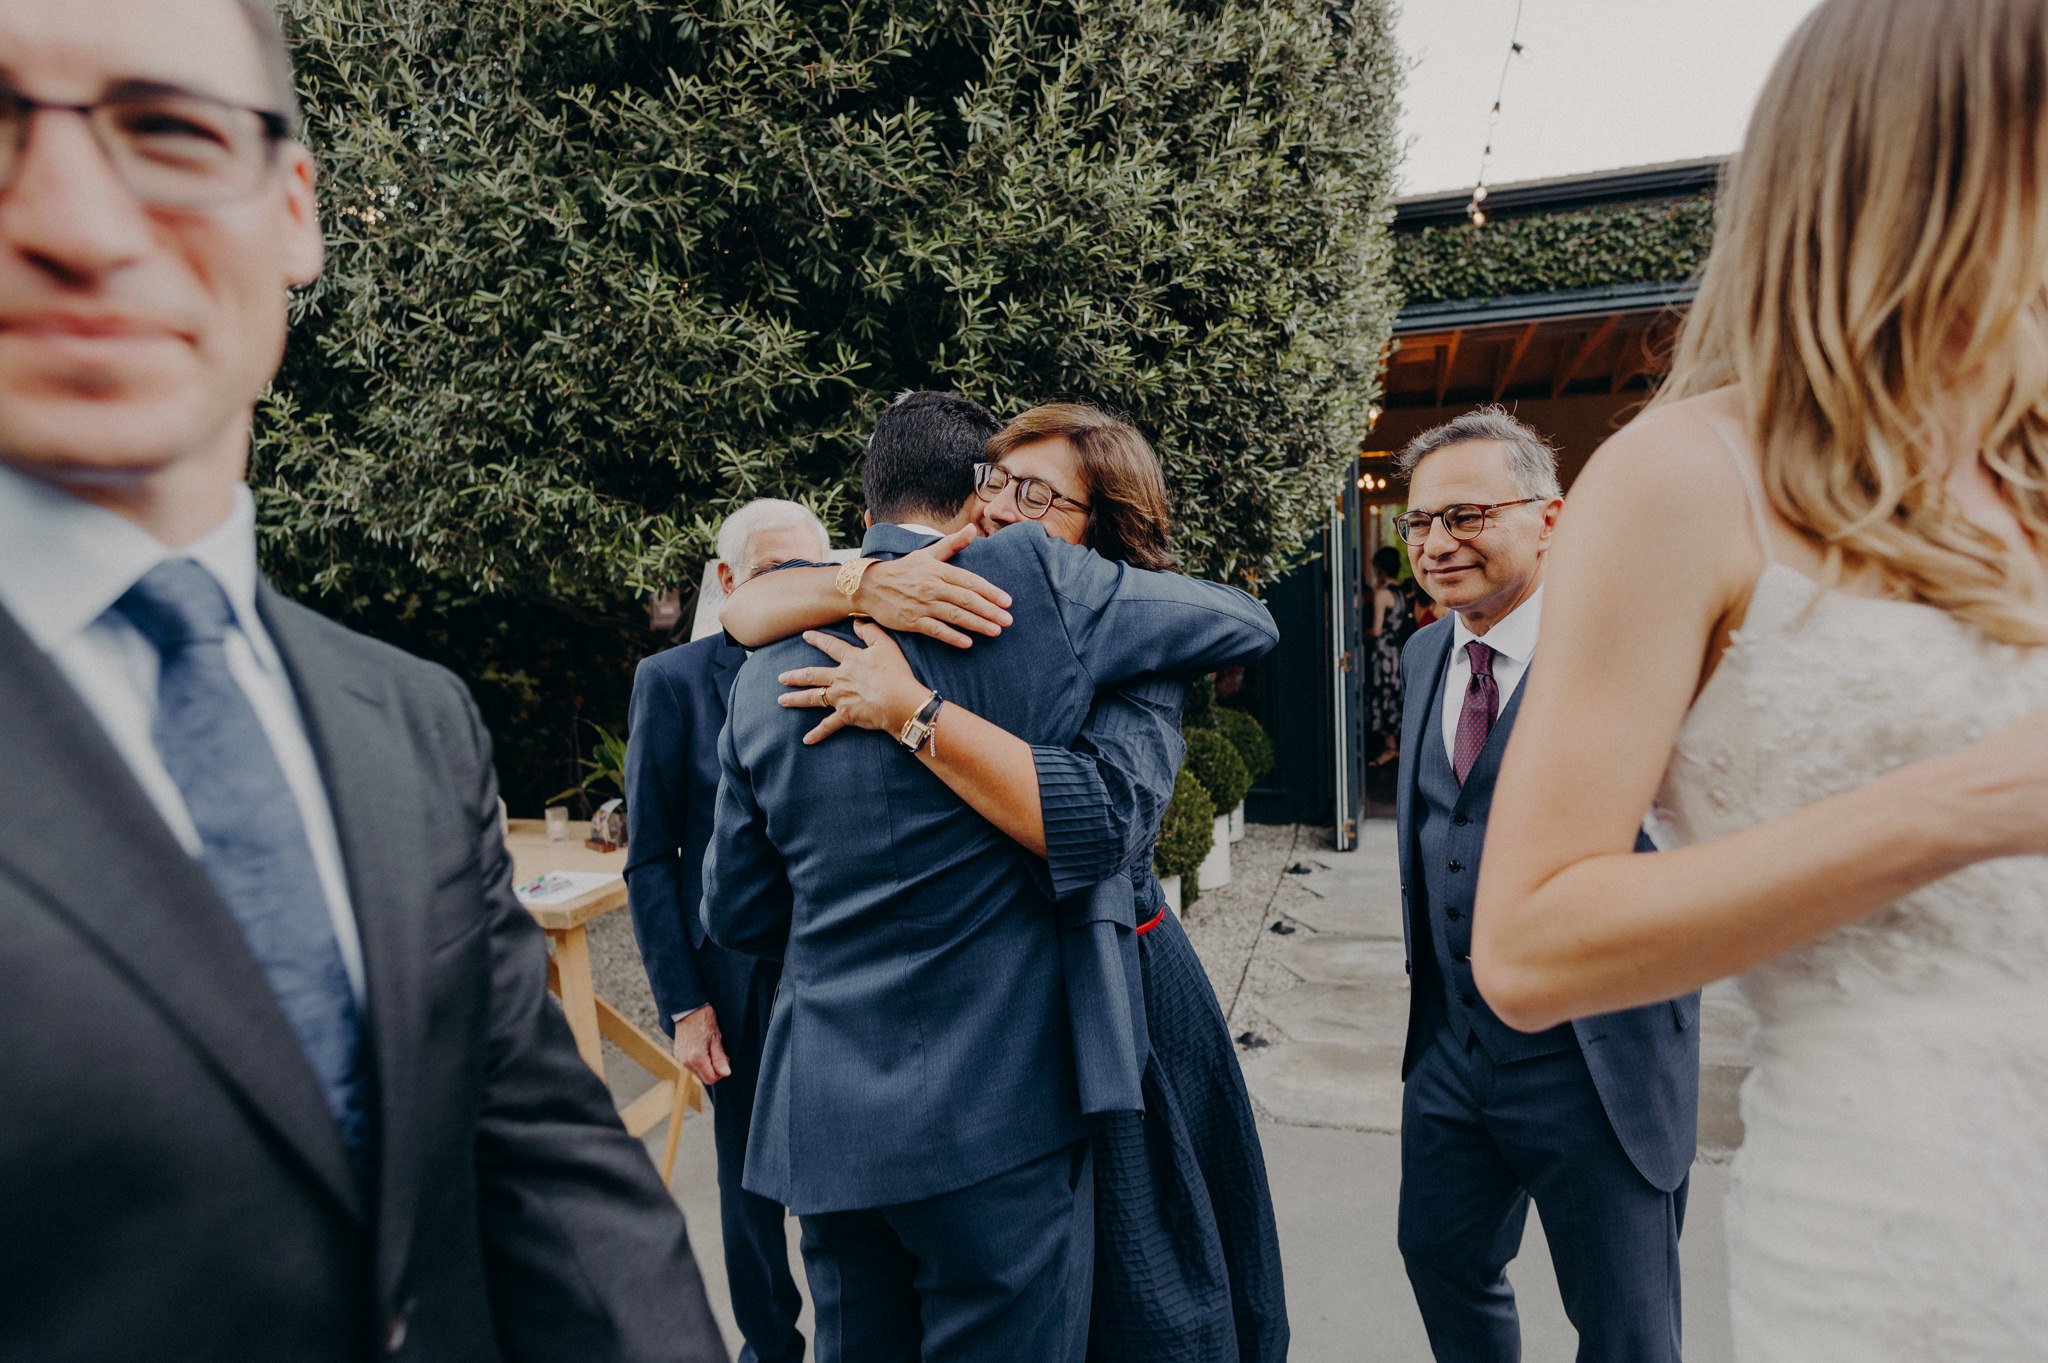 the fig house wedding - queer wedding photographers in los angeles - itlaphoto.com-87.jpg